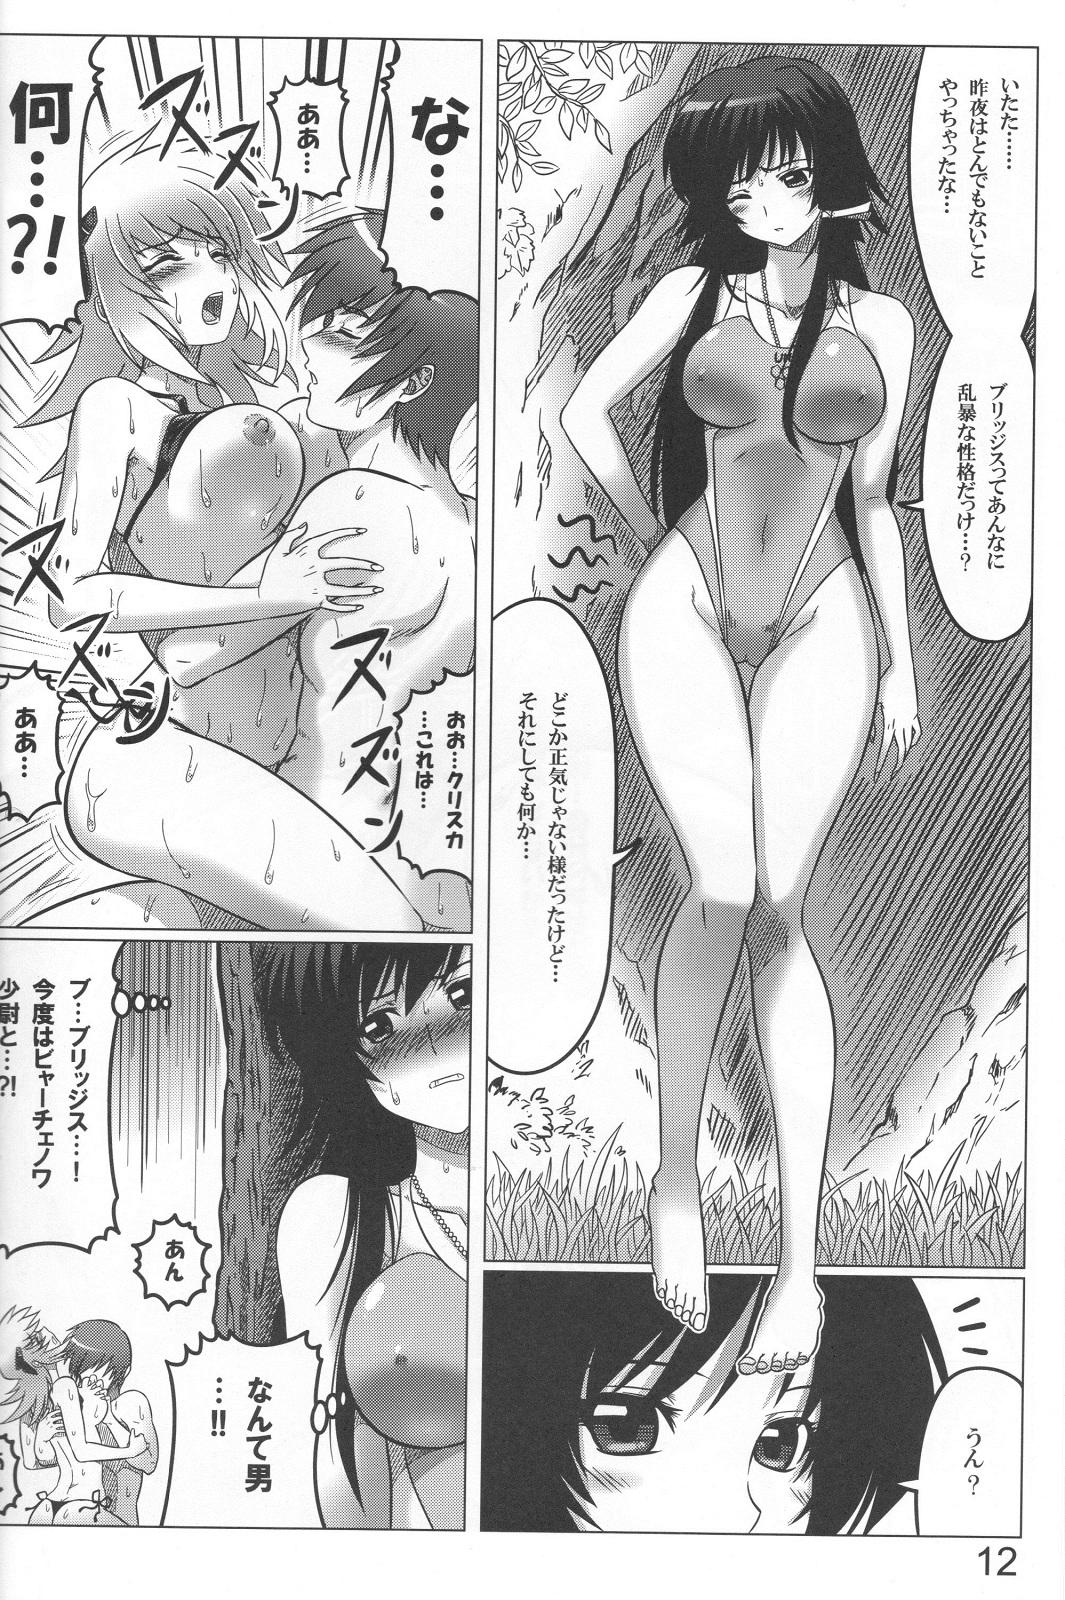 Real Amateur Intermission H - Muv-luv alternative total eclipse Dicks - Page 12